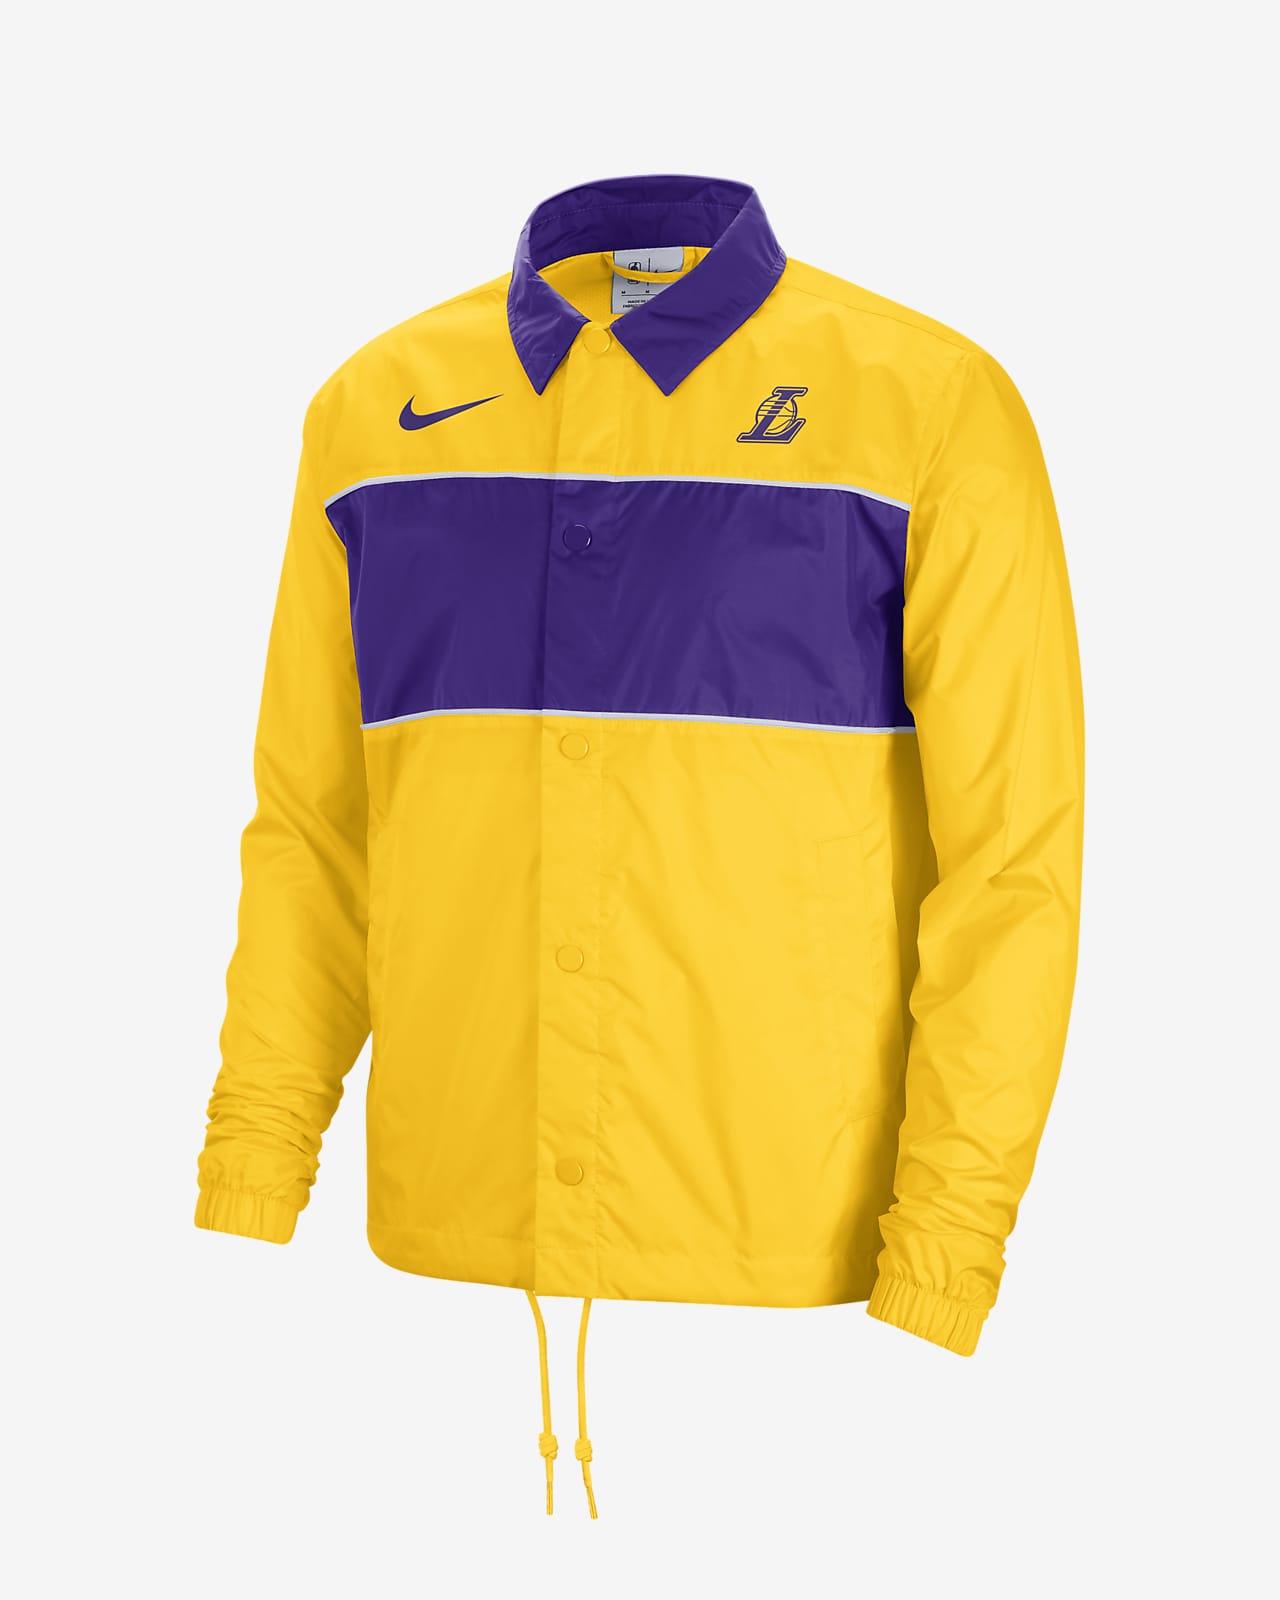 Los Angeles Lakers Courtside Men's Nike 